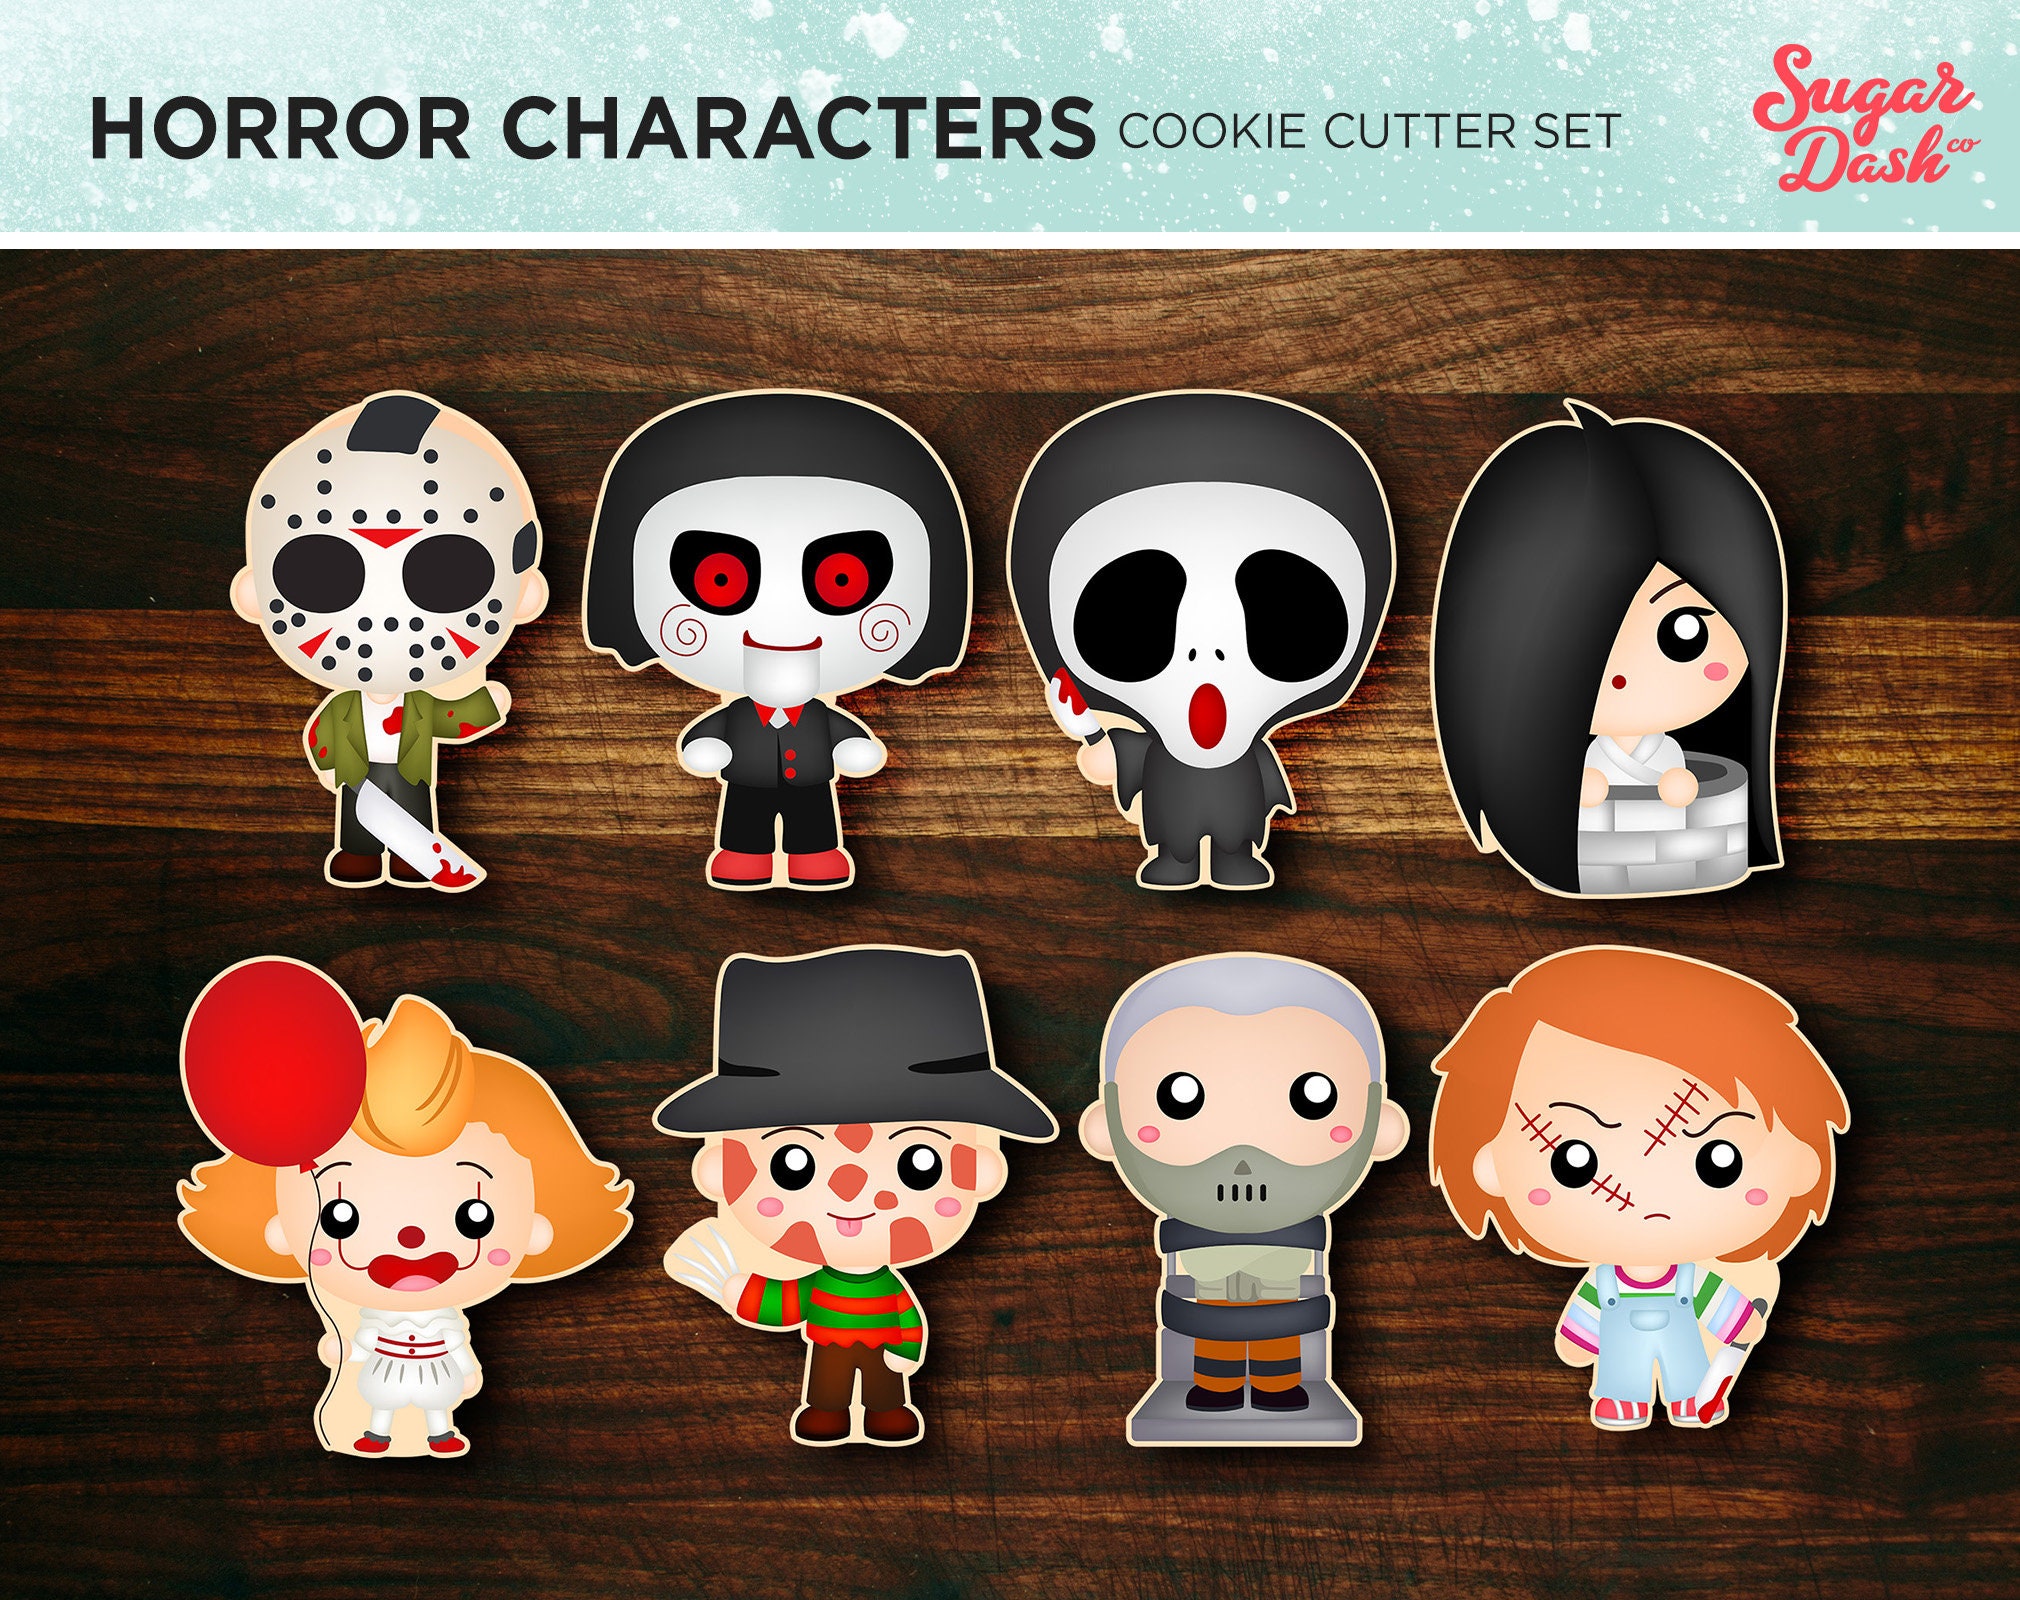 Horror Movie Characters Cookie Cutter Set of 8 - Etsy